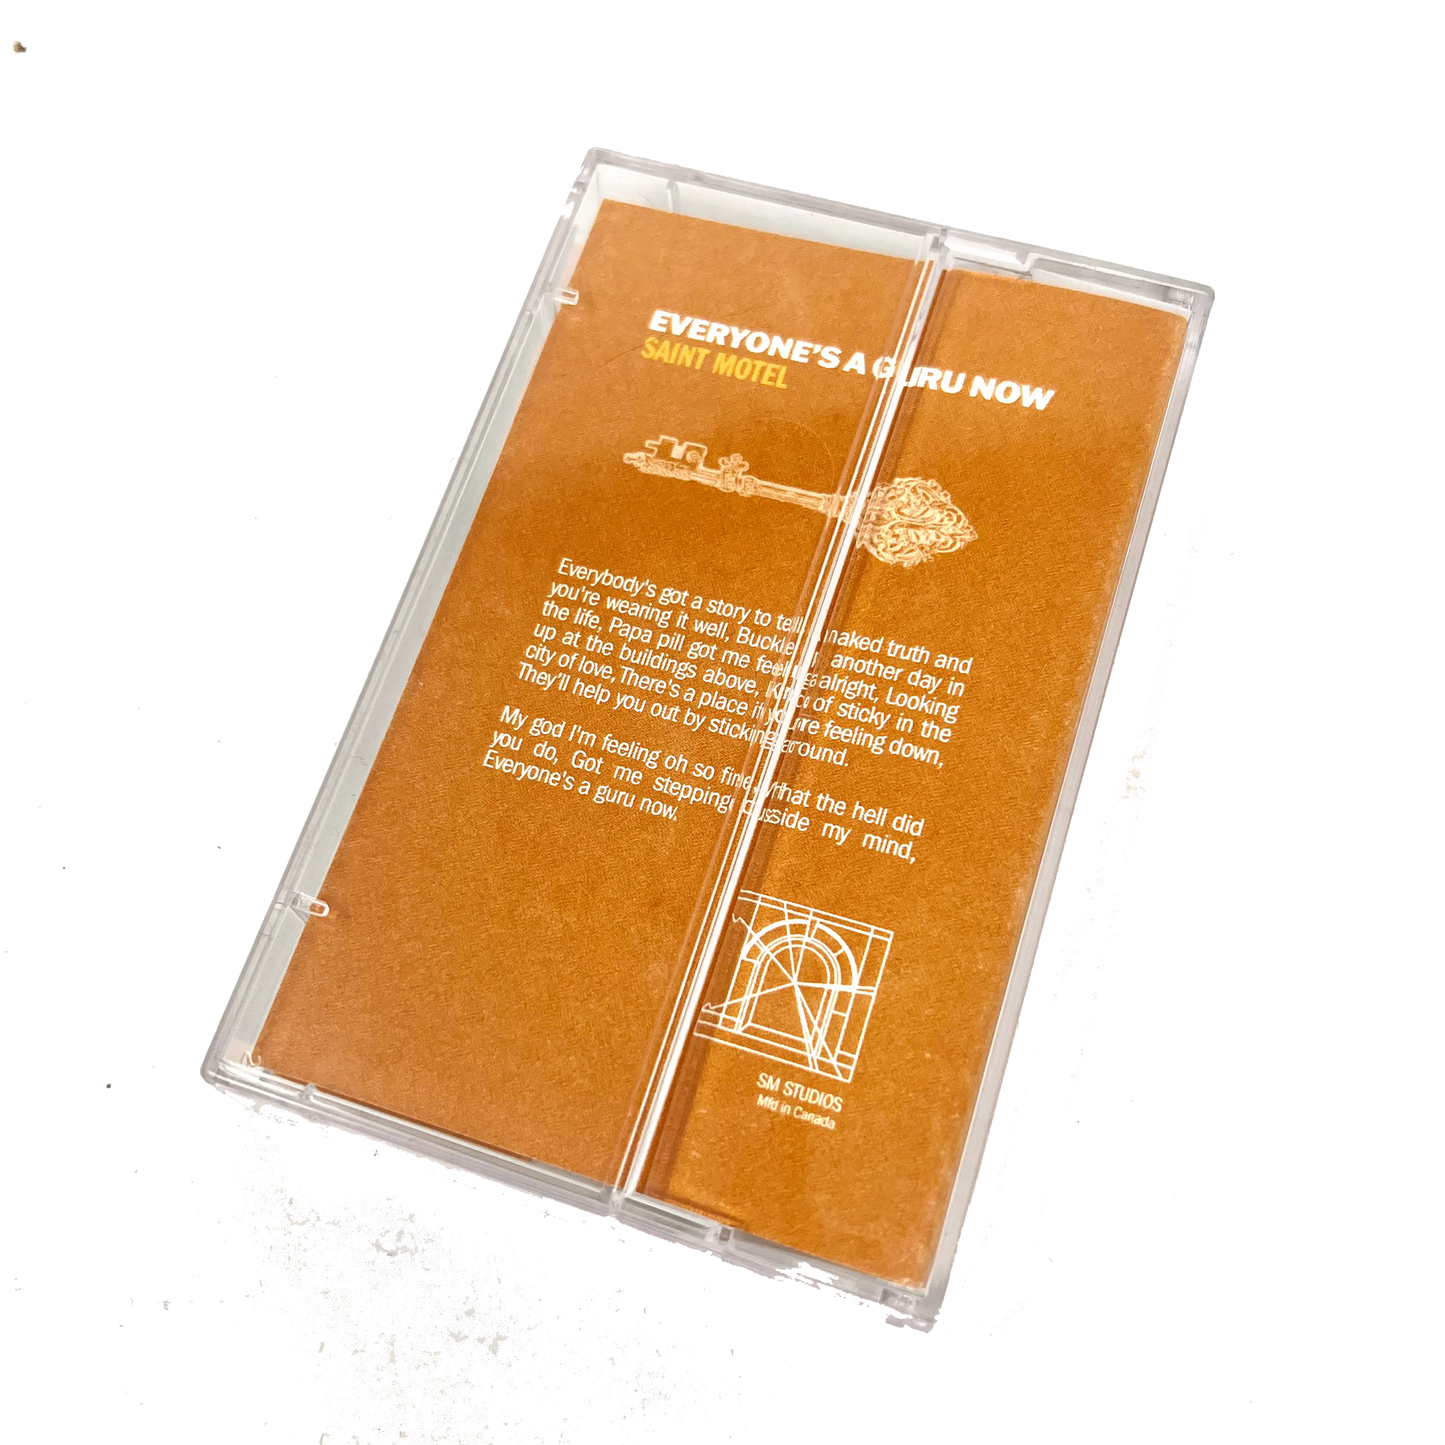 LIMITED EDITION - "Everyone's a Guru Now" cassette